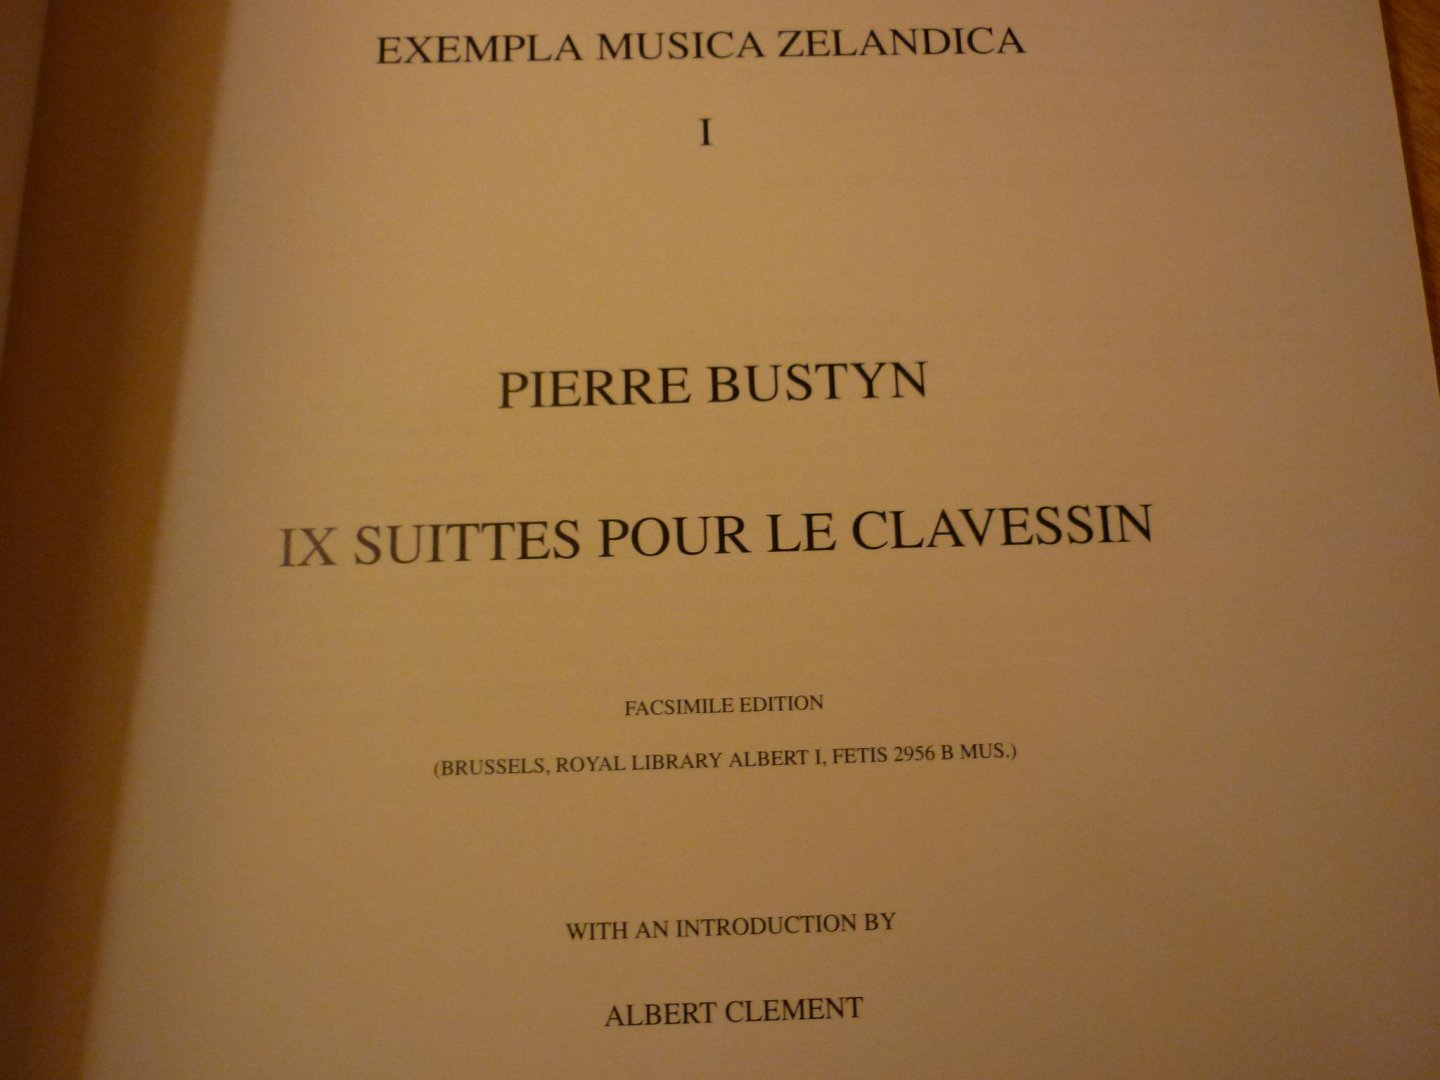 Bustyn; Pierre (1649-1729) - IX Suittes pour le Clavessin; (Exempla Musica Zelandica - I) with an introduction by Albert Clement; Facsimile Edition